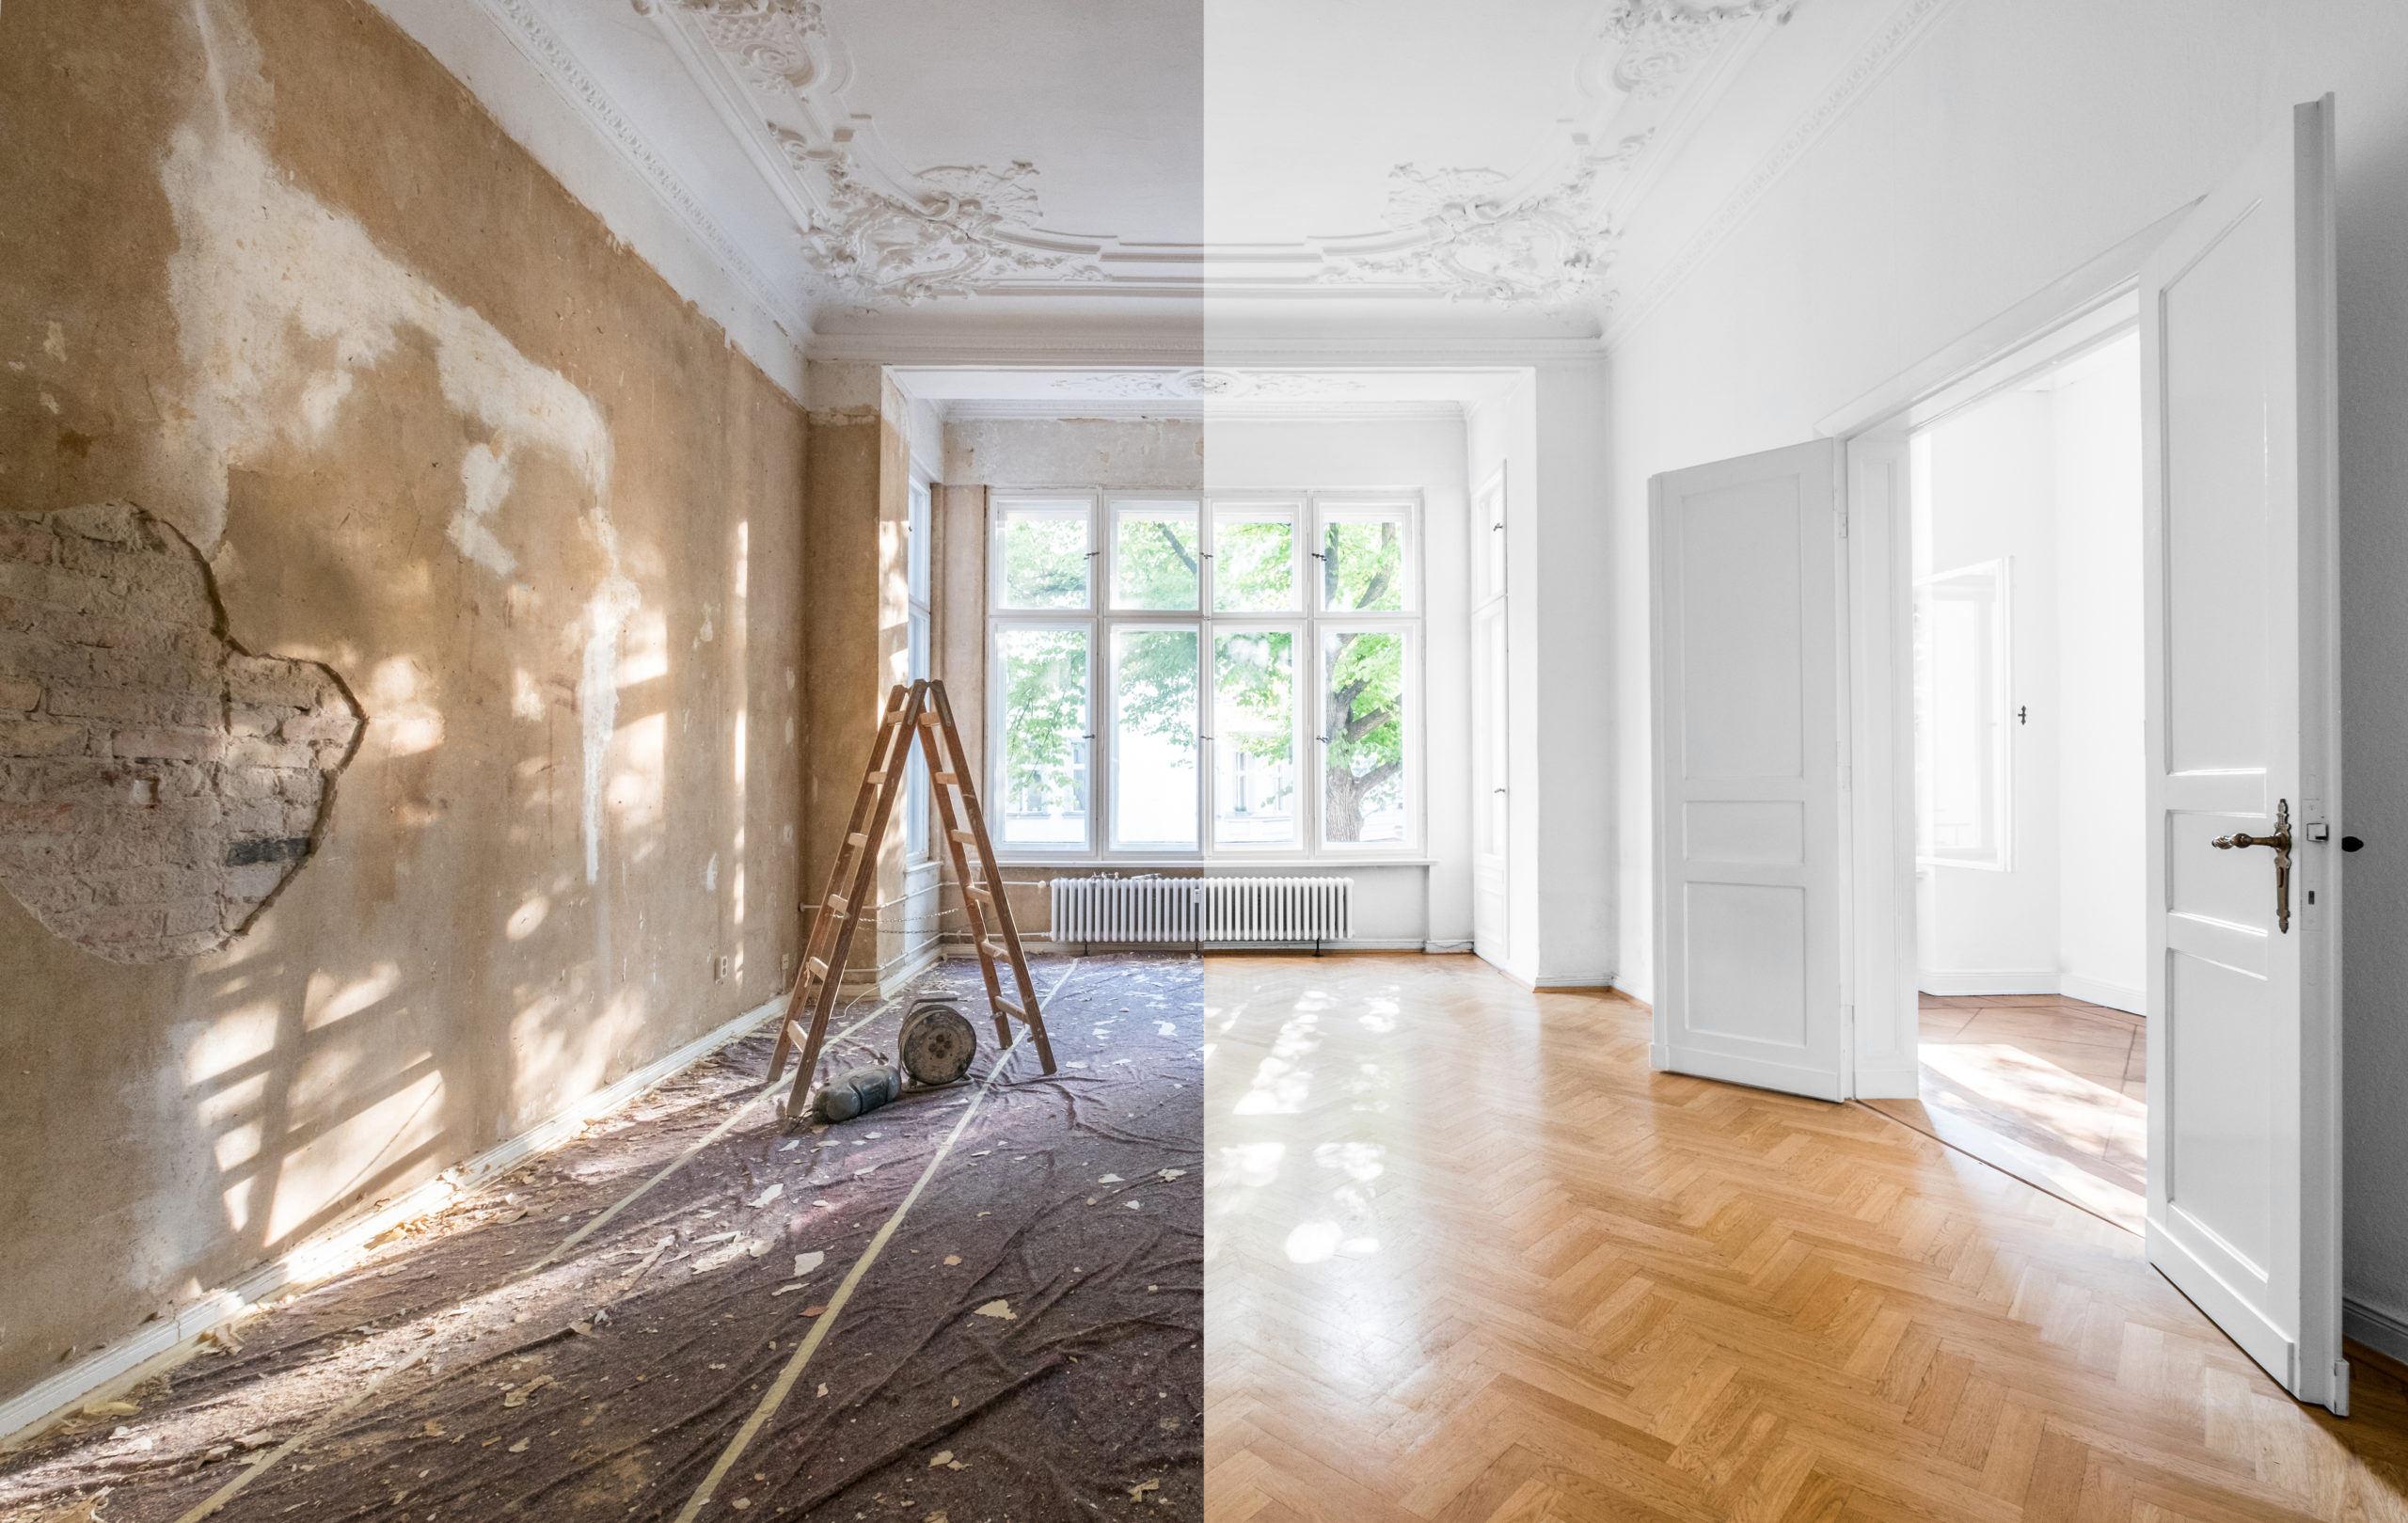 Renovation,Concept,-,Apartment,Before,And,After,Restoration,Or,Refurbishment